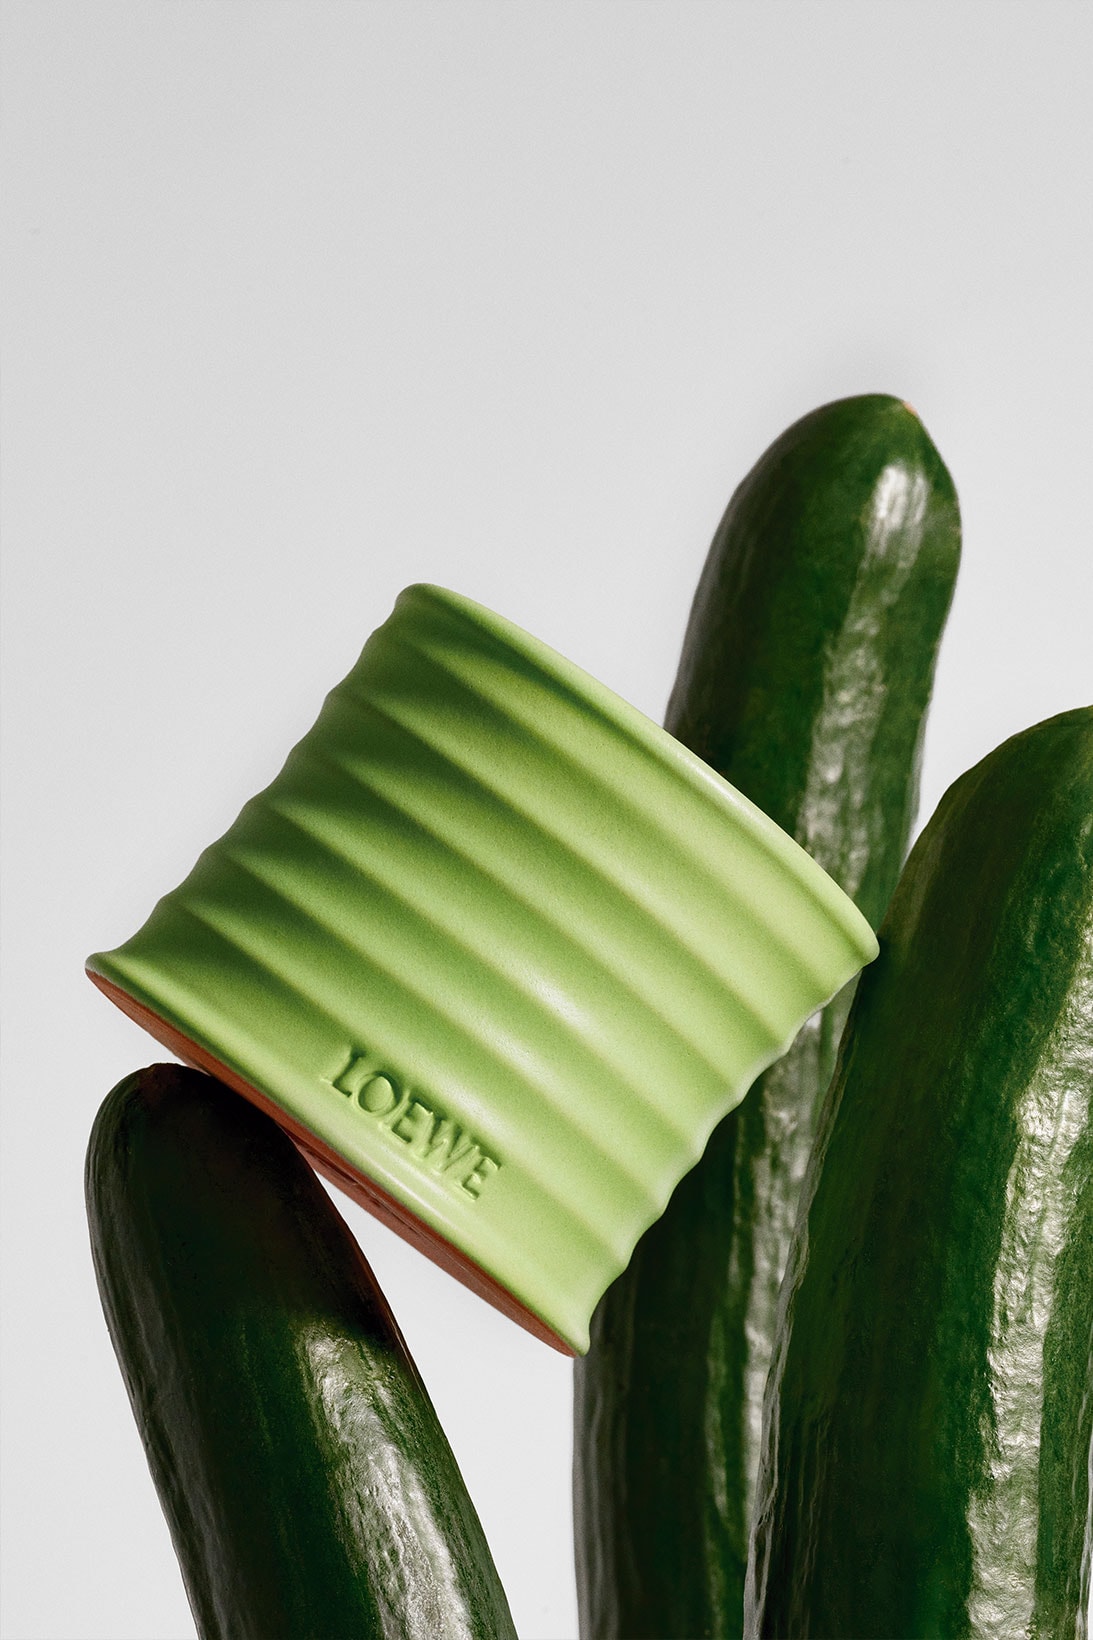 Loewe Candle Cucumber Scent Home Fragrance Release Info